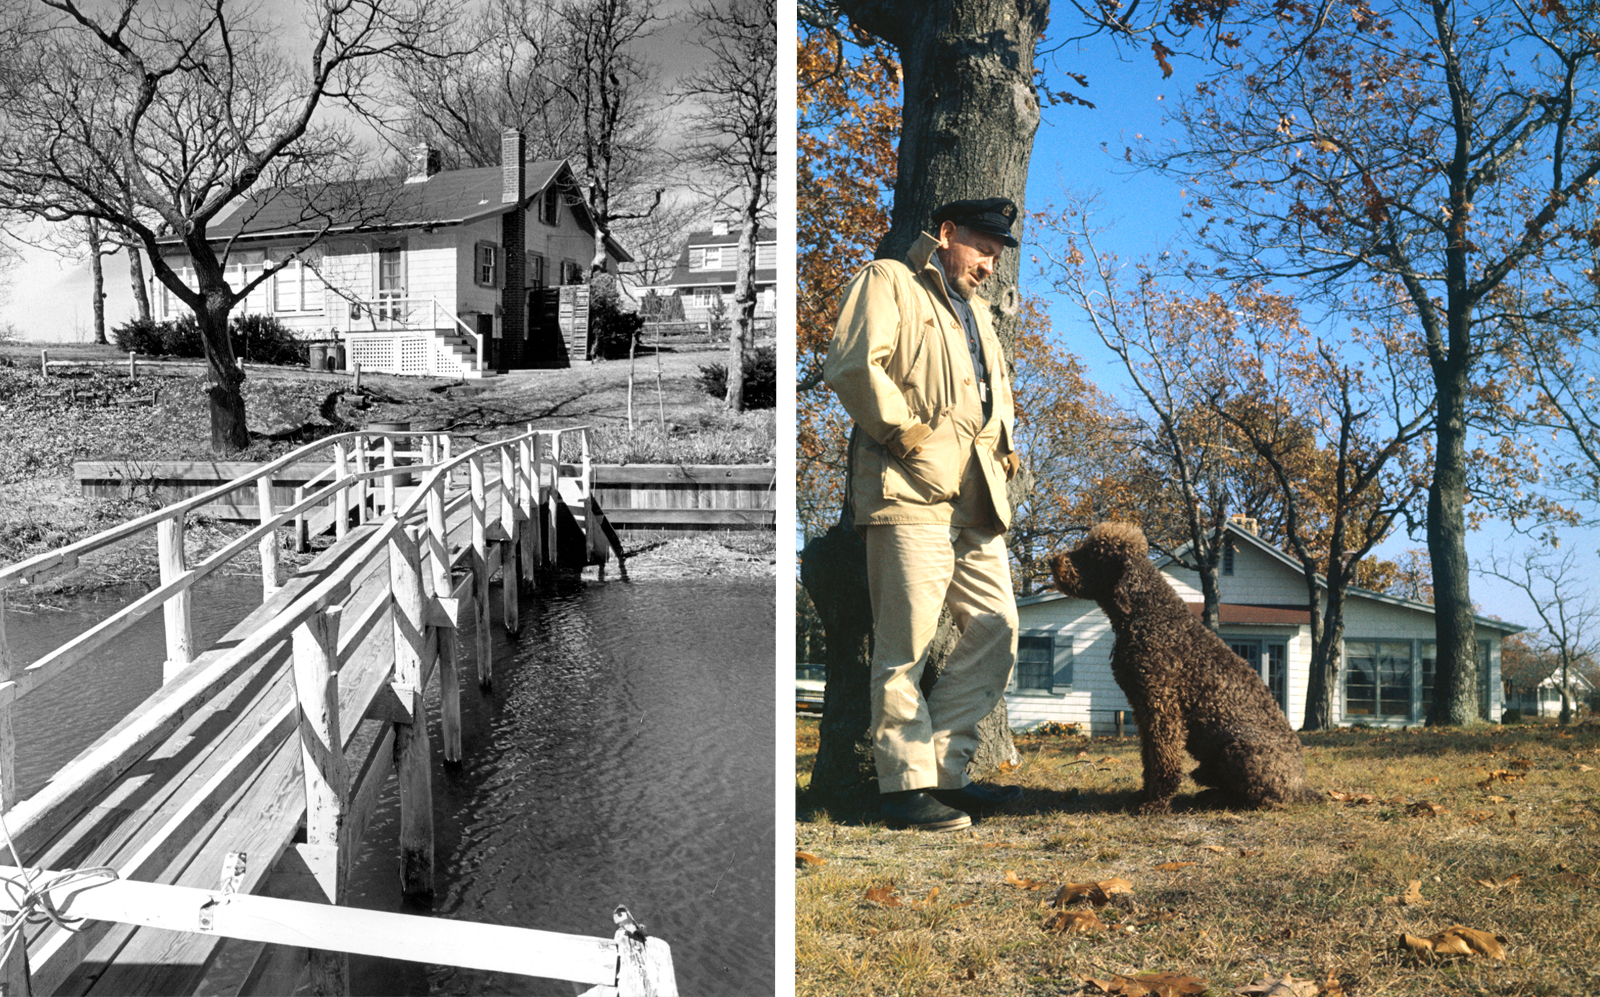 Photos from the 60s of John Steinbeck and his poodle Charley on their property. (Getty)